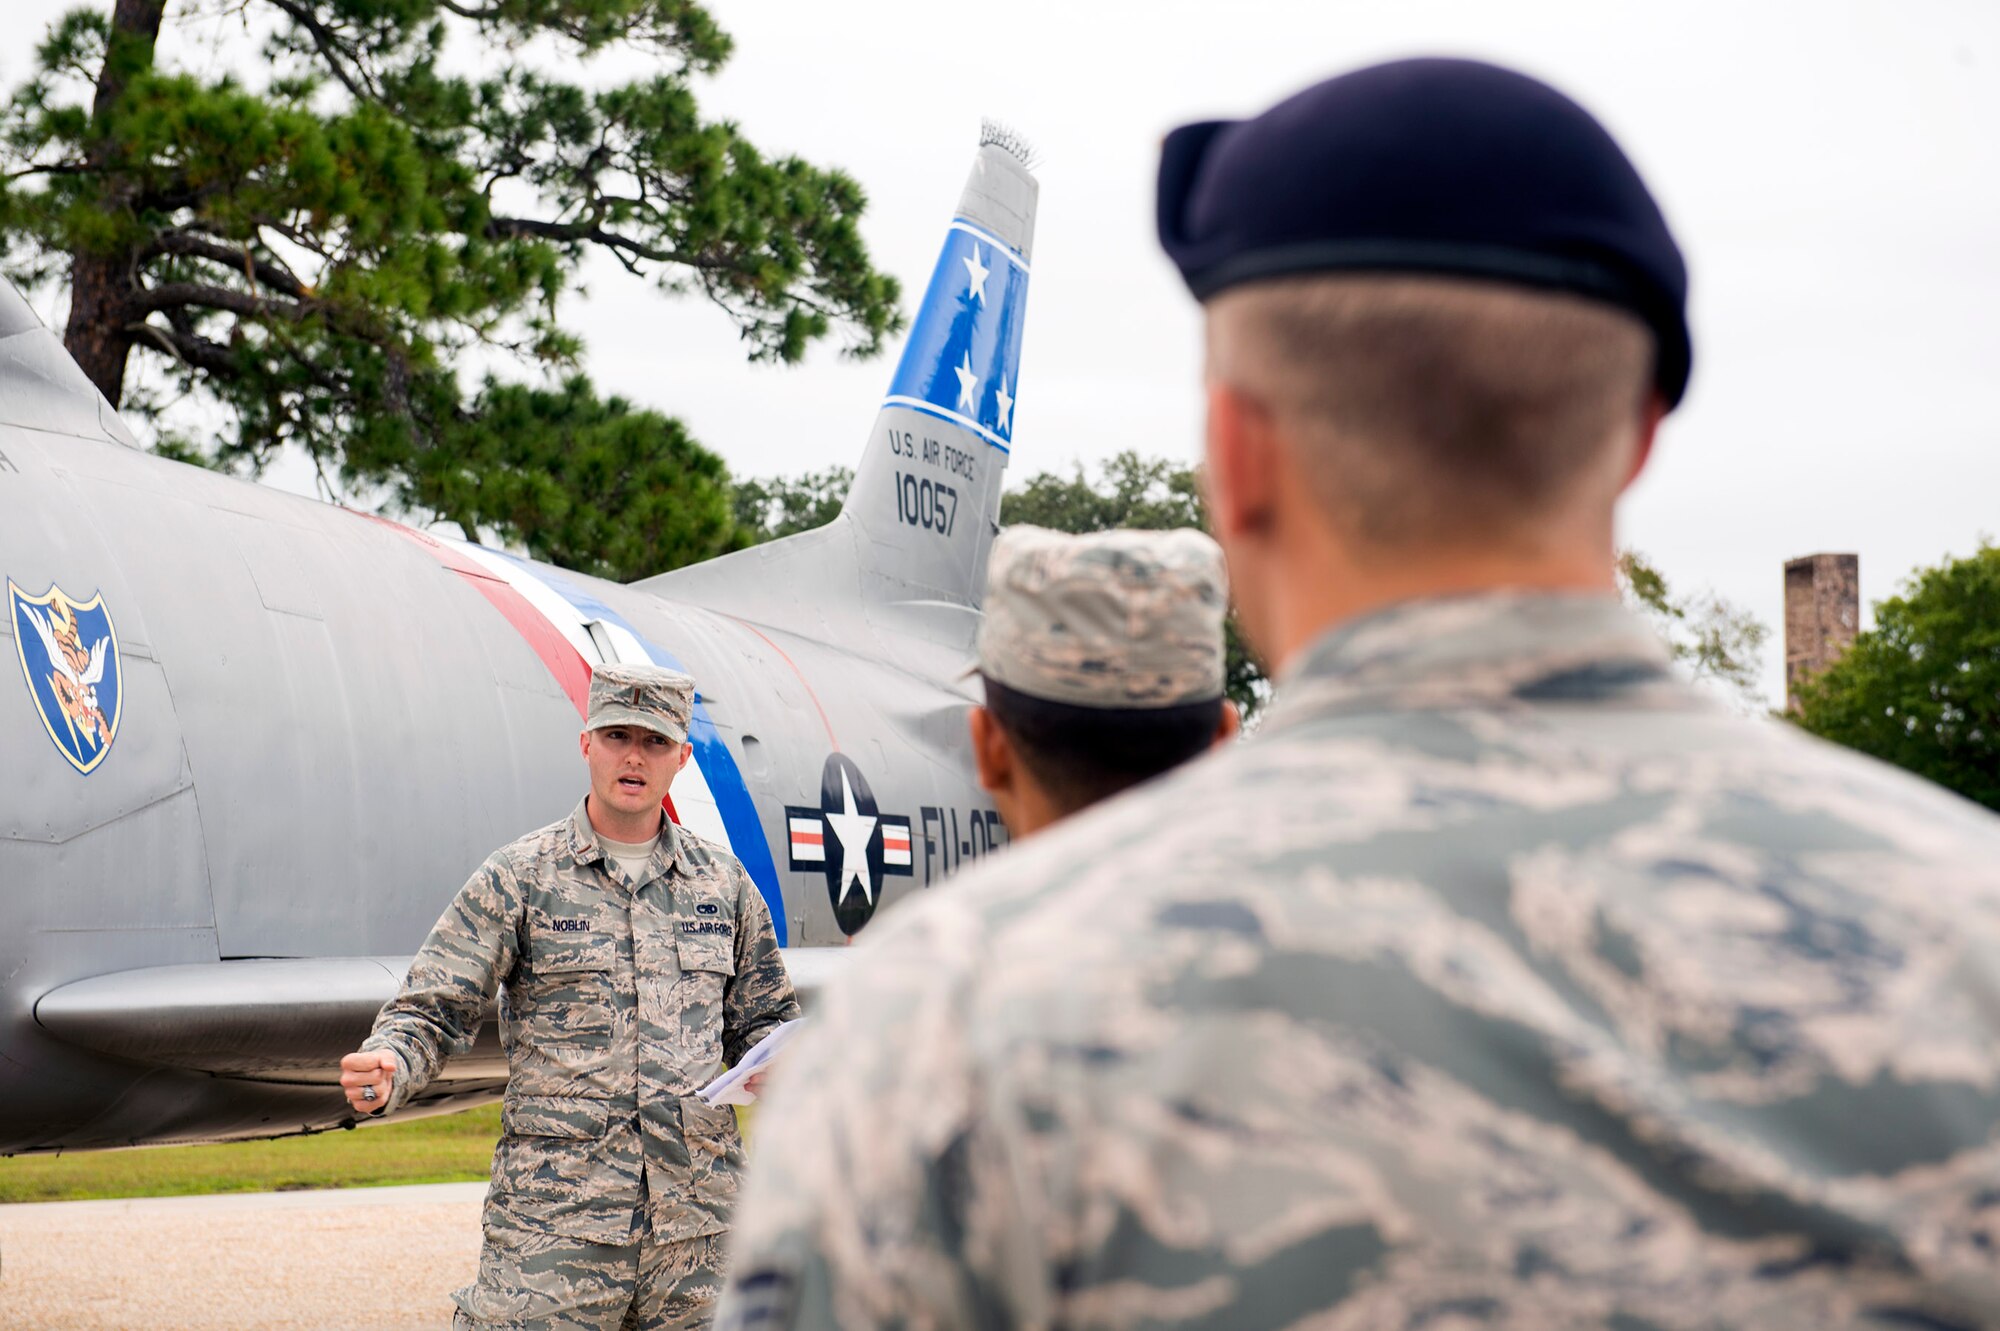 U.S. Air Force 2nd Lt. Ryan Noblin, 75th Aircraft Maintenance Unit officer in charge, briefs Airmen about various static displays in the President George W. Bush Airpark, Oct. 6, 2016, at Moody Air Force Base, Ga. The briefing focused on the maintenance innovations through the years on Moody’s aircraft from the Curtiss P-40 Warhawk to the A-10C Thunderbolt II. (U.S. Air Force photo by Airman 1st Class Greg Nash)